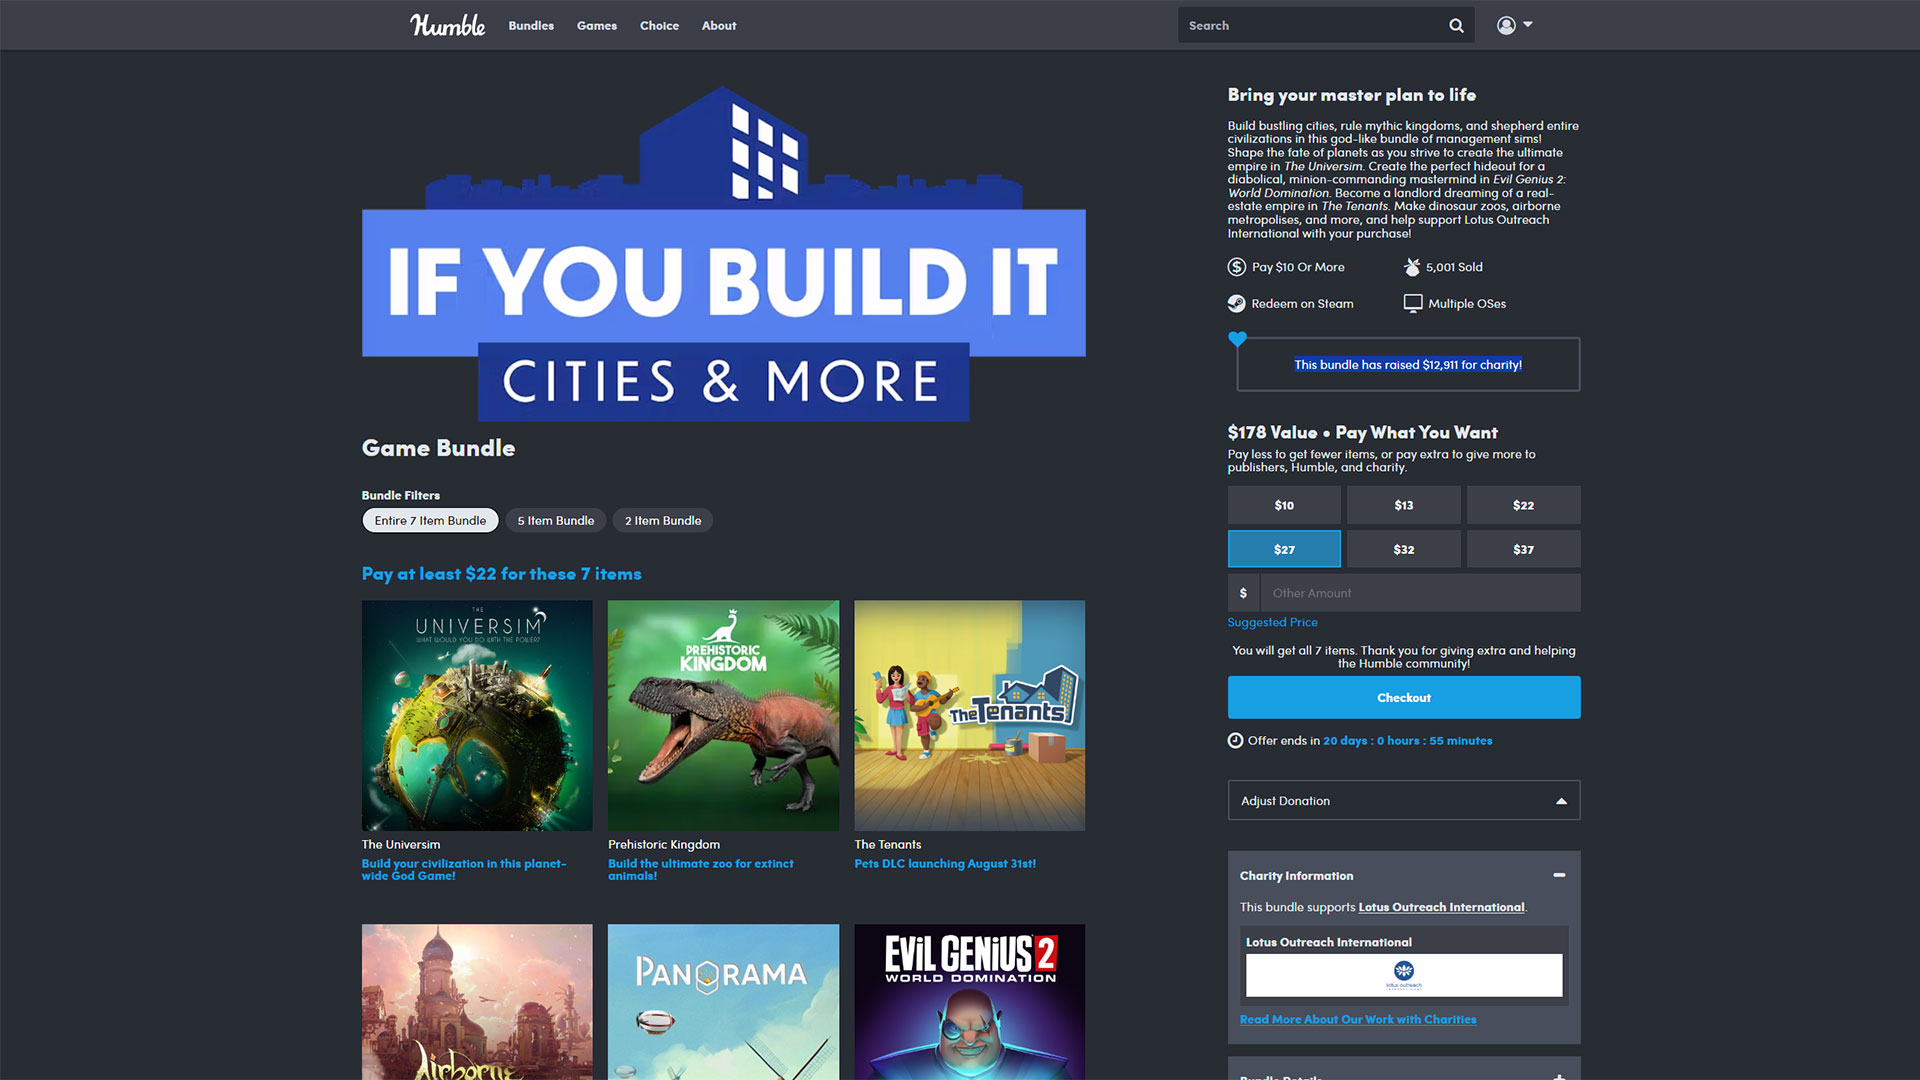 The If You Build It Cities & More bundle is currently available at Humble Bundle